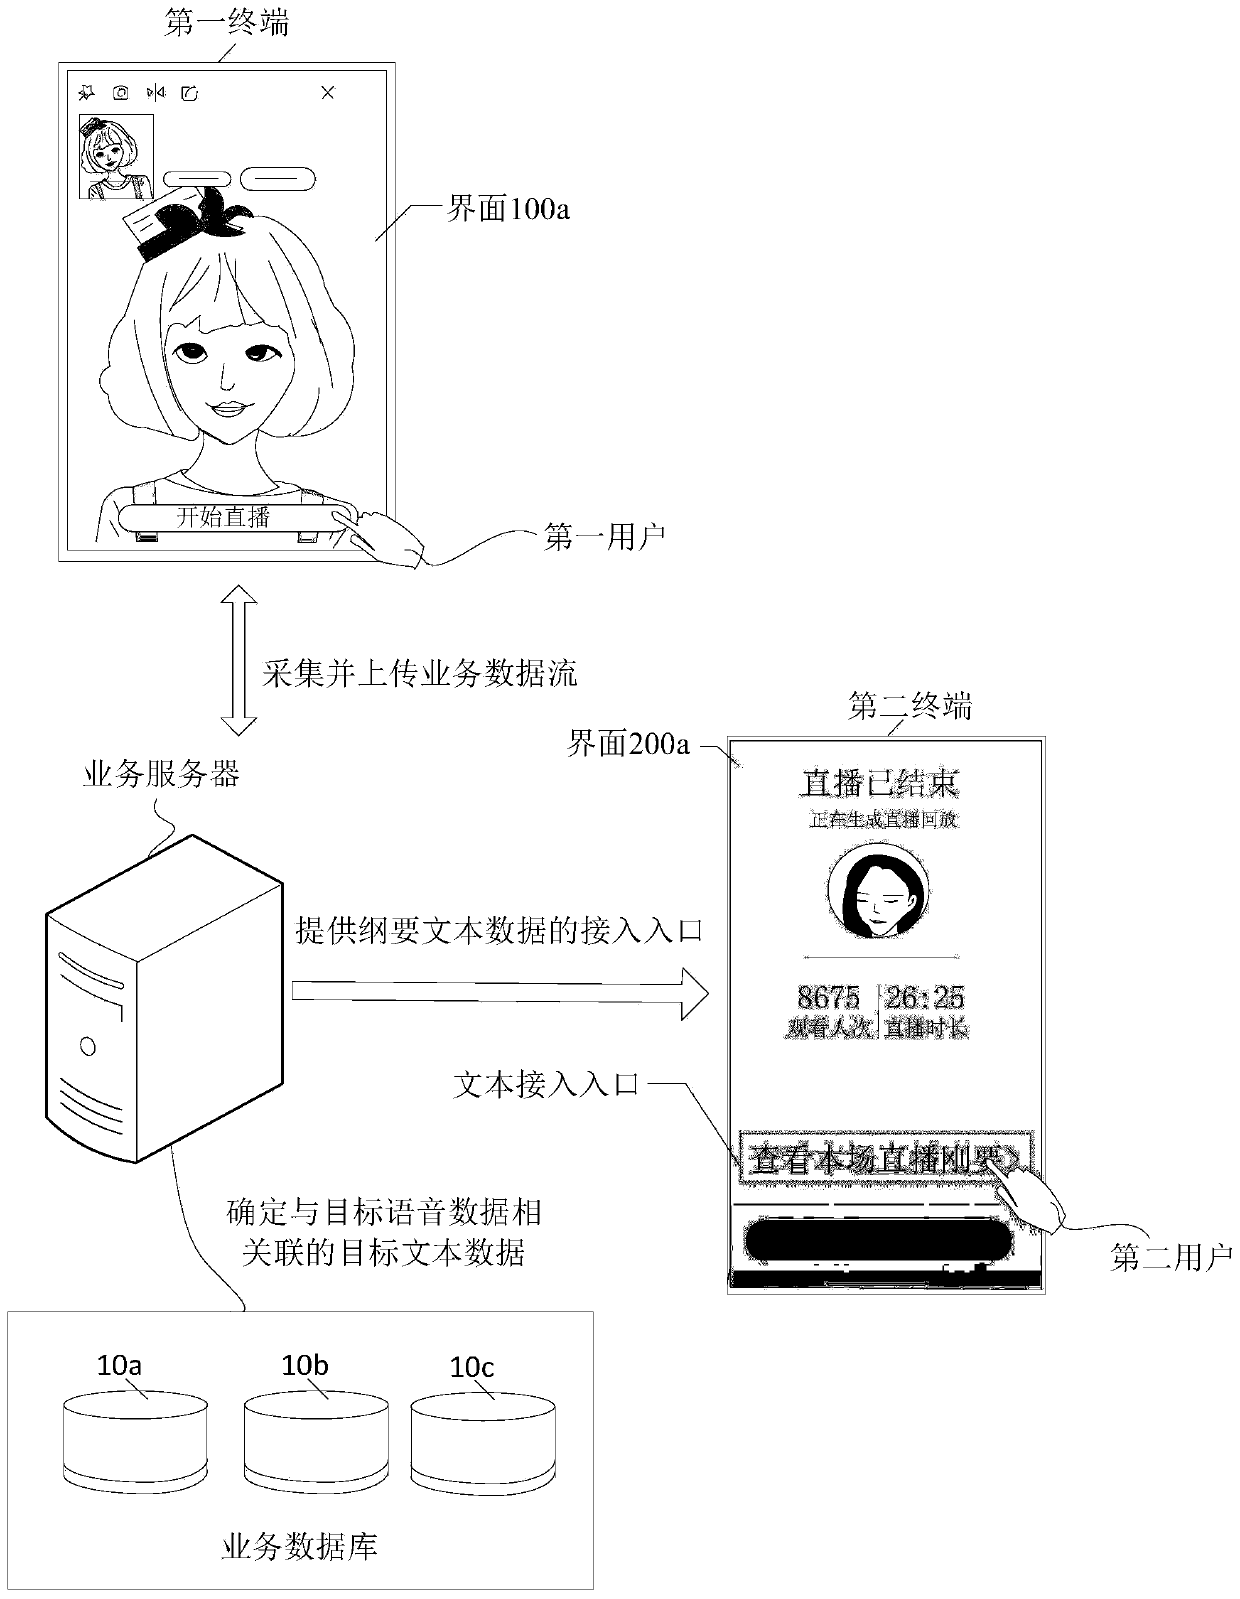 Voice data processing method and device, and storage medium